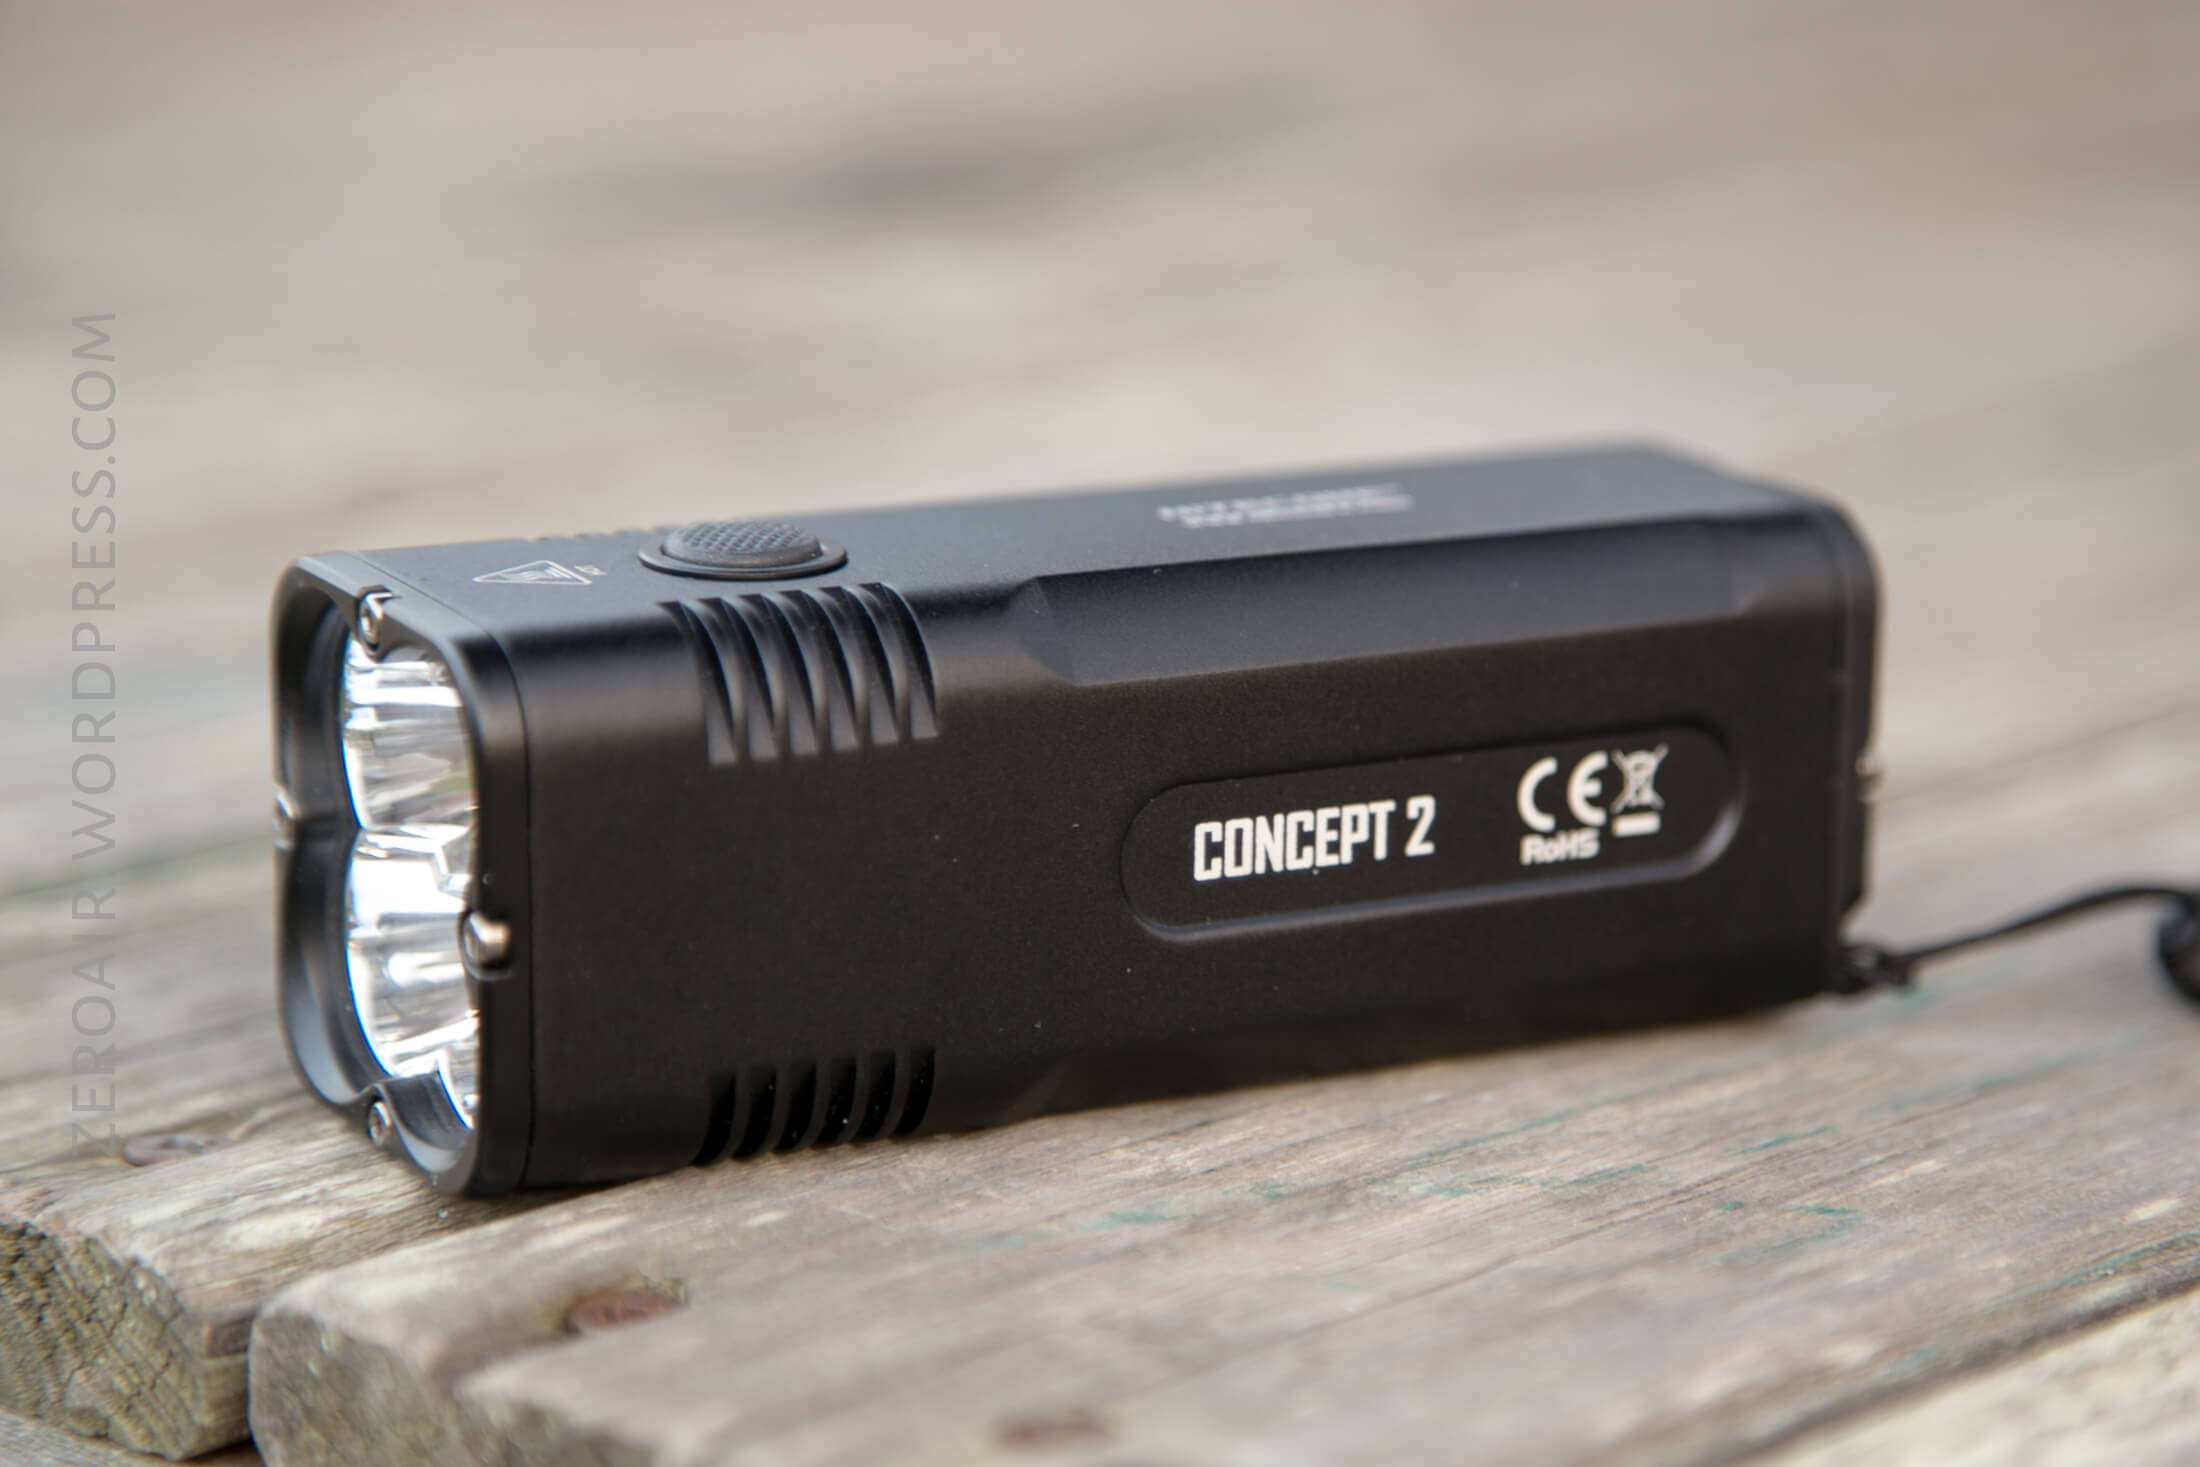 New Nitecore Concept 2 Rechargeable LED Torch 